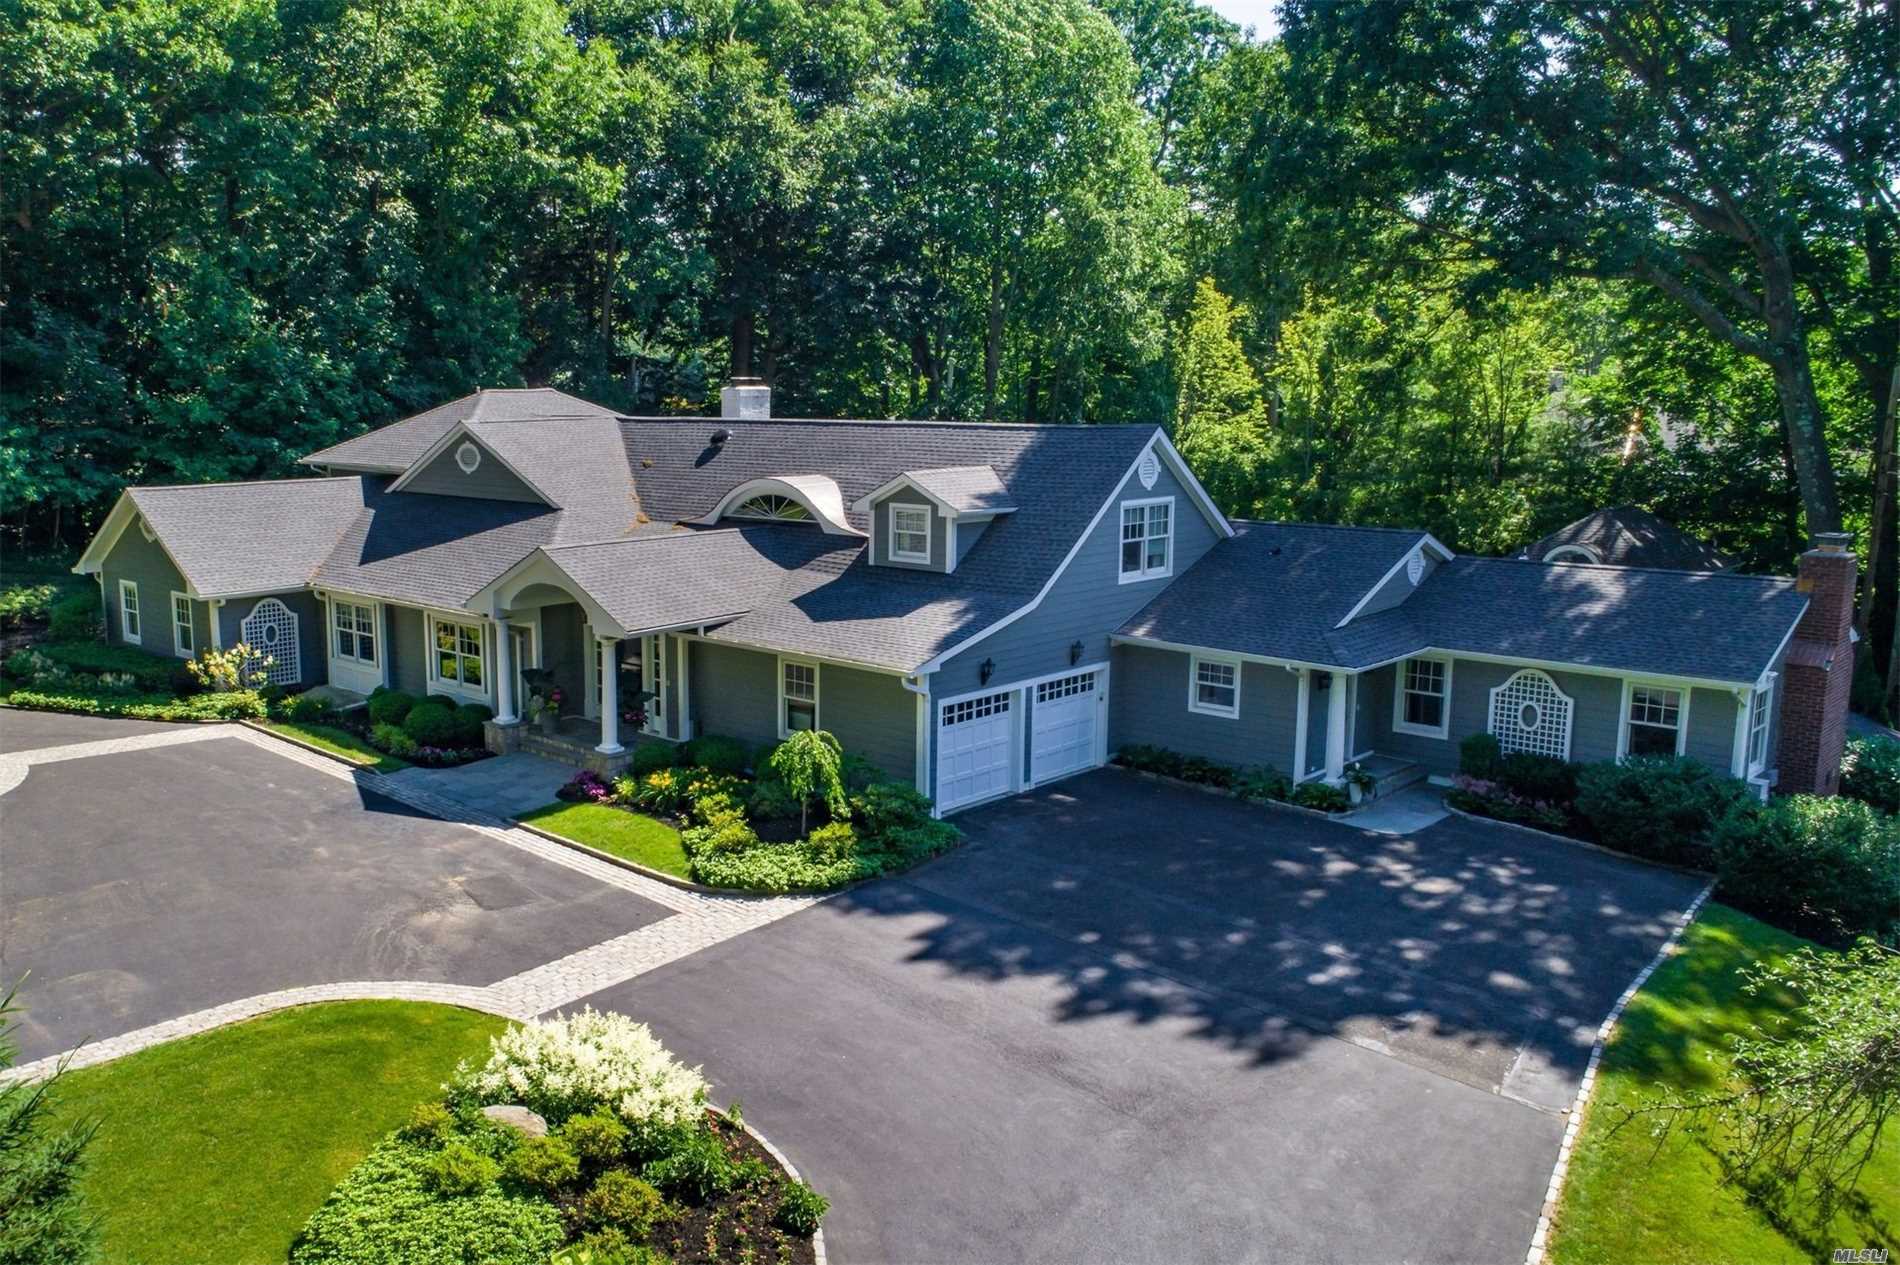 Updated 6000 Sq Ft 6 Bedroom, 3.55 Open Concept Home. Master Retreat (Approx 1200 Sq Ft) On First Floor. 1.46 Acres With Heated Gunite Pool, Pool House, Putting Green. 2 Gas Fireplaces. Mudroom/Laundry Room. Whole House Generator. 2018 New Roof And Hardie Board Siding